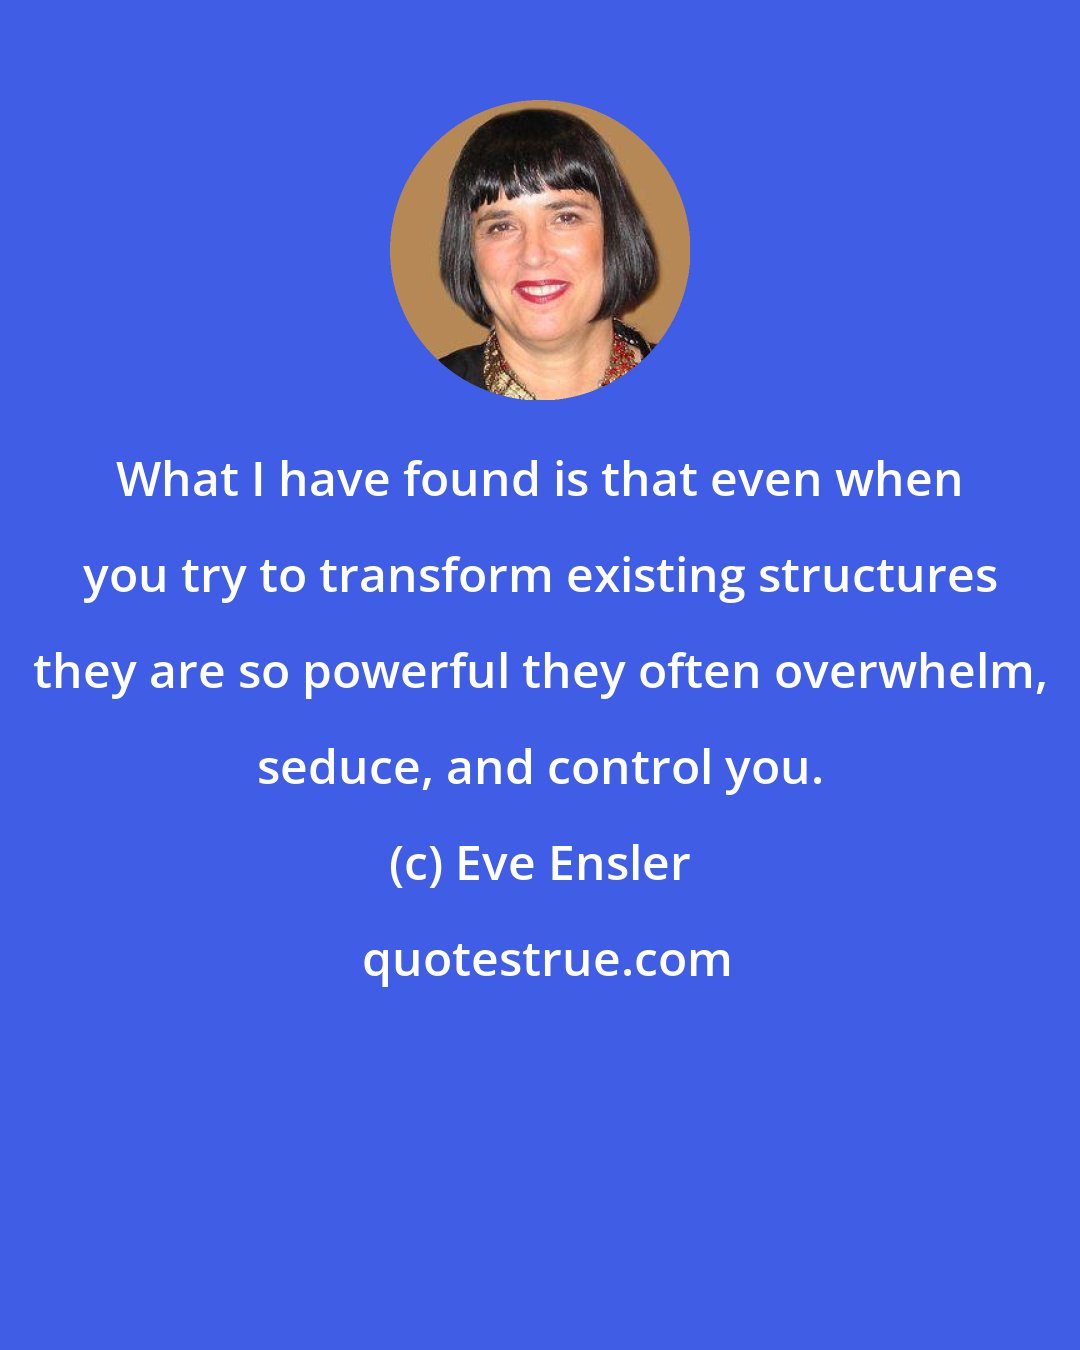 Eve Ensler: What I have found is that even when you try to transform existing structures they are so powerful they often overwhelm, seduce, and control you.